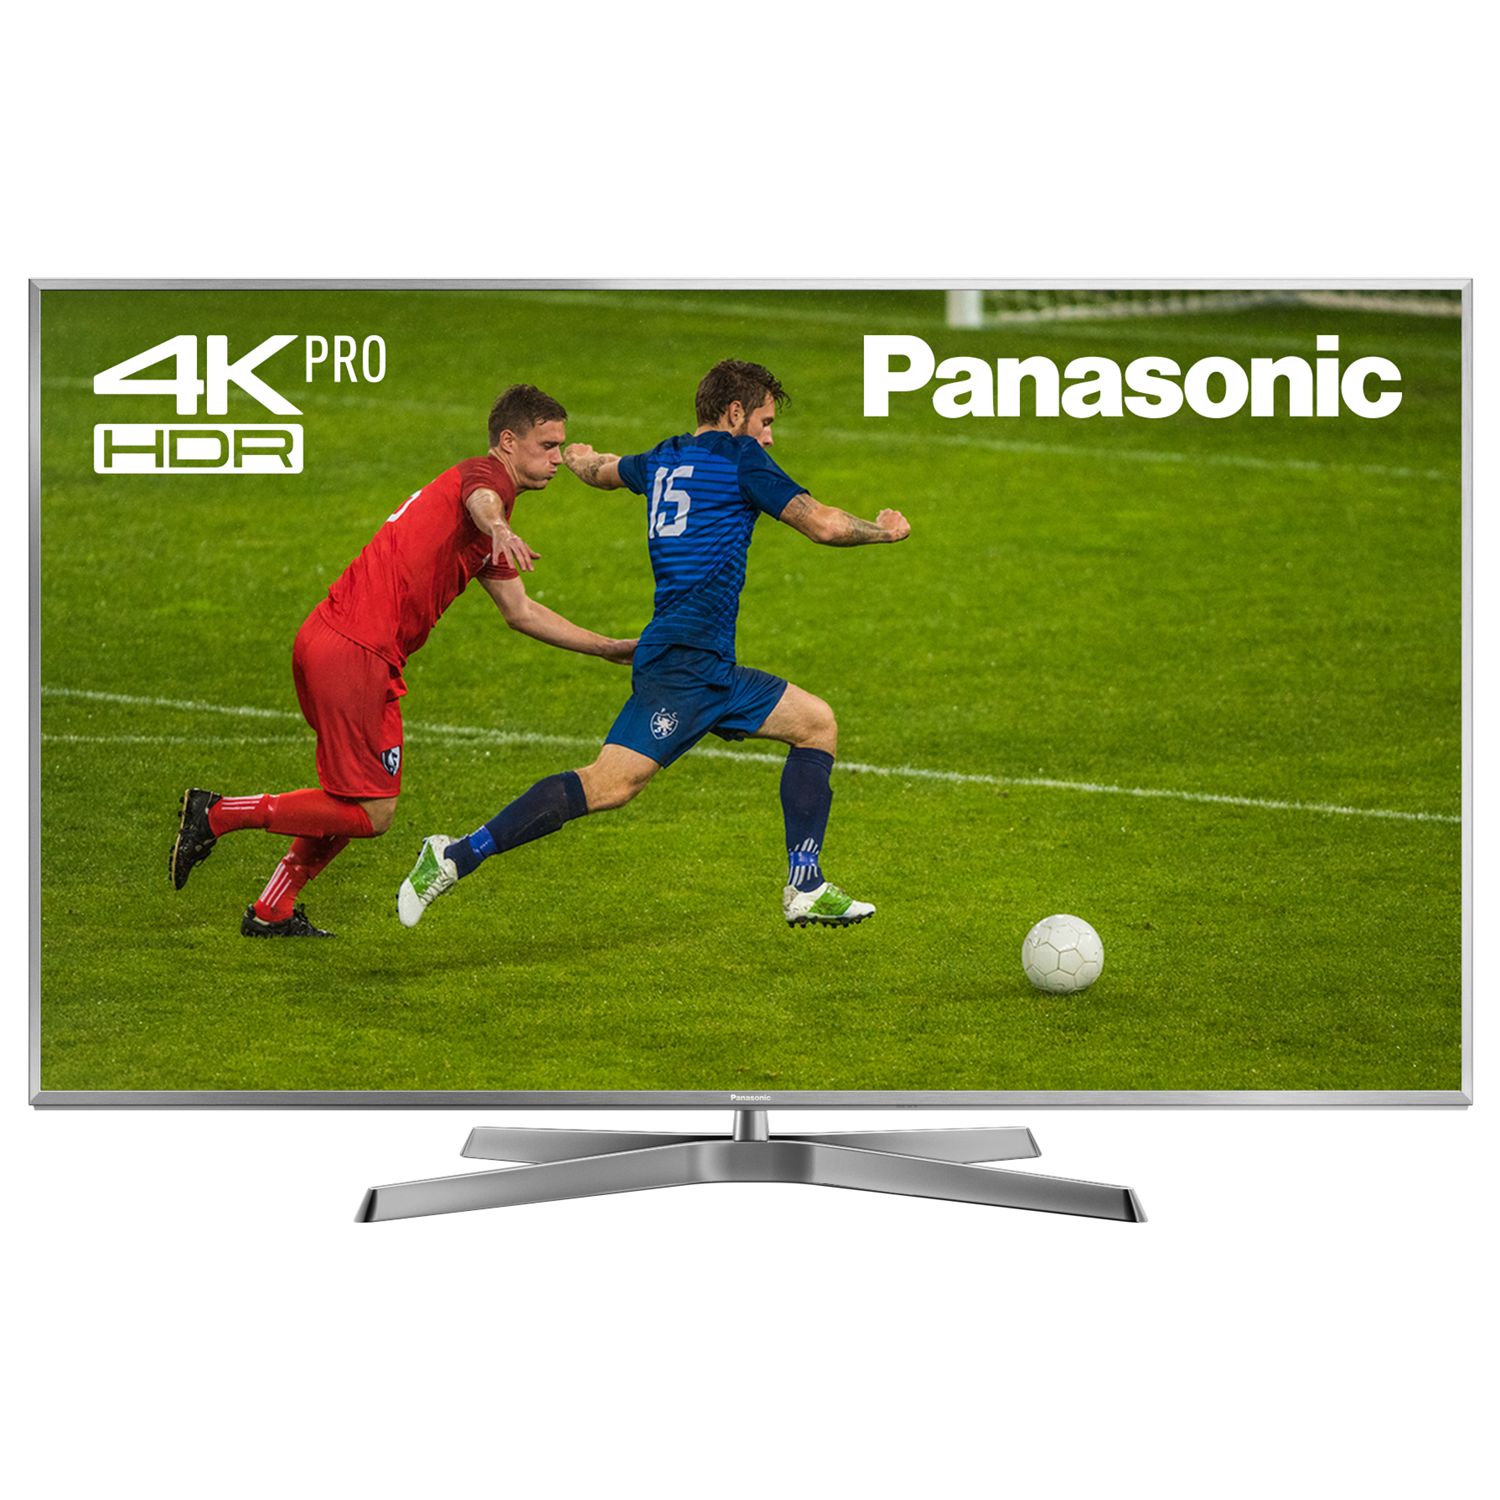 Panasonic TX-65EX750B LED HDR 4K Ultra HD 3D Smart TV, 65" with Freeview Play/Freesat HD & Swivel Stand, Ultra HD Certified, Silver